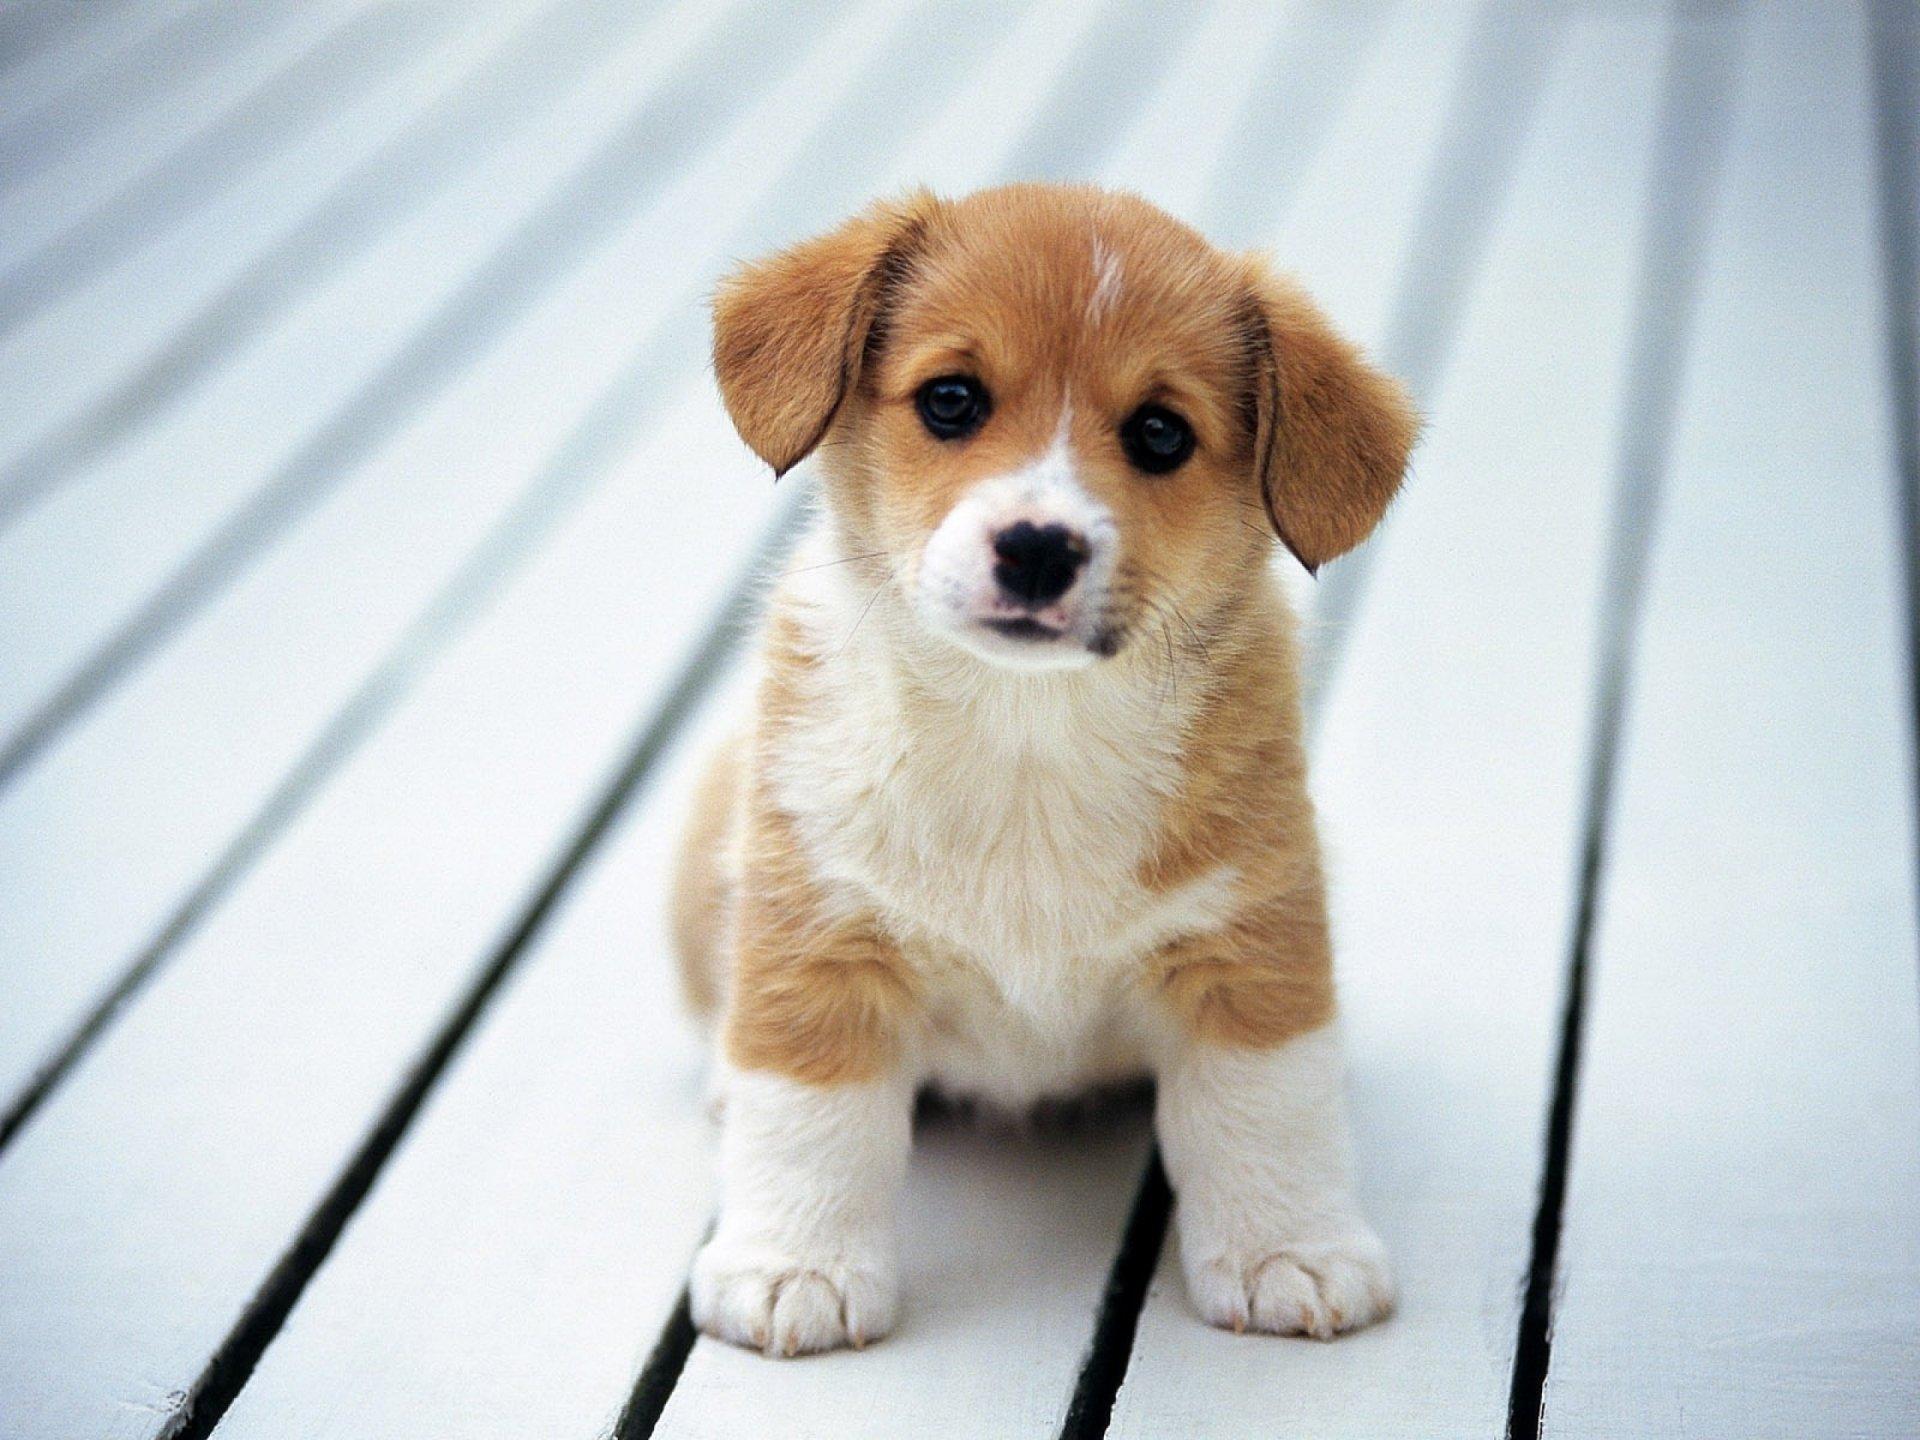 Cute Baby Dogs Wallpapers - Wallpaper Cave